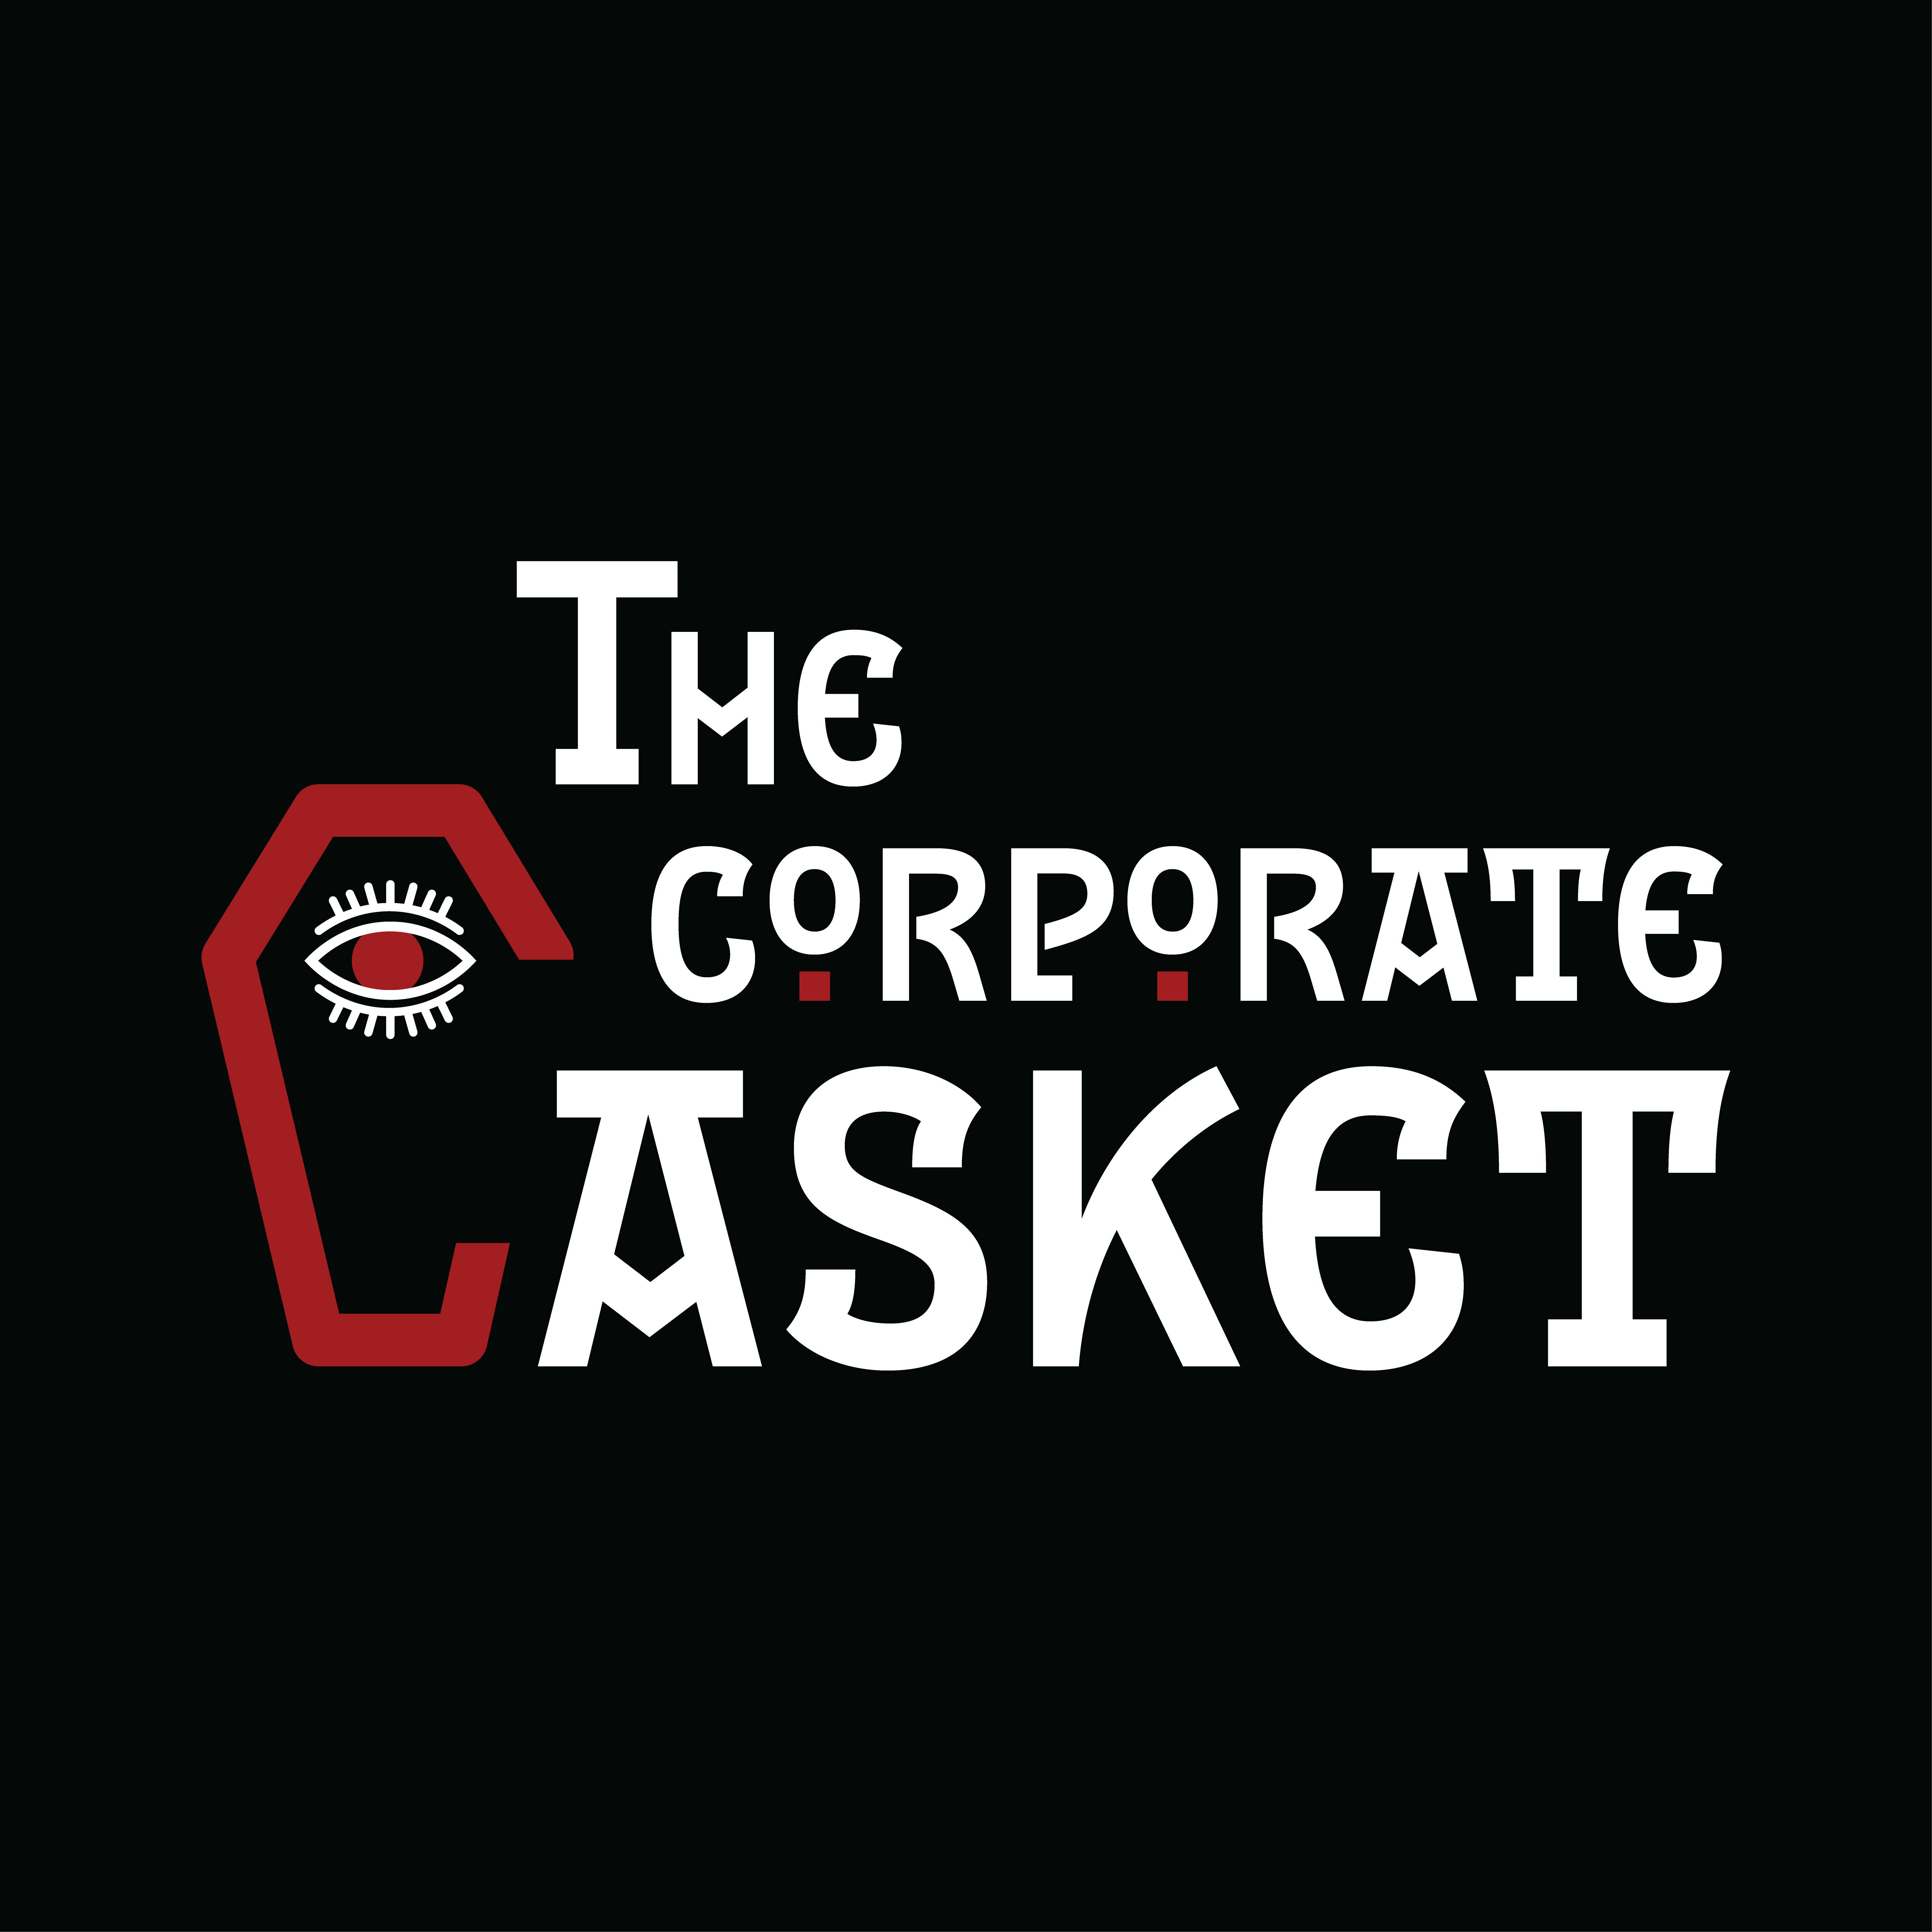 TLC's Cesspit of Exploitation and Abuse | Corporate Casket